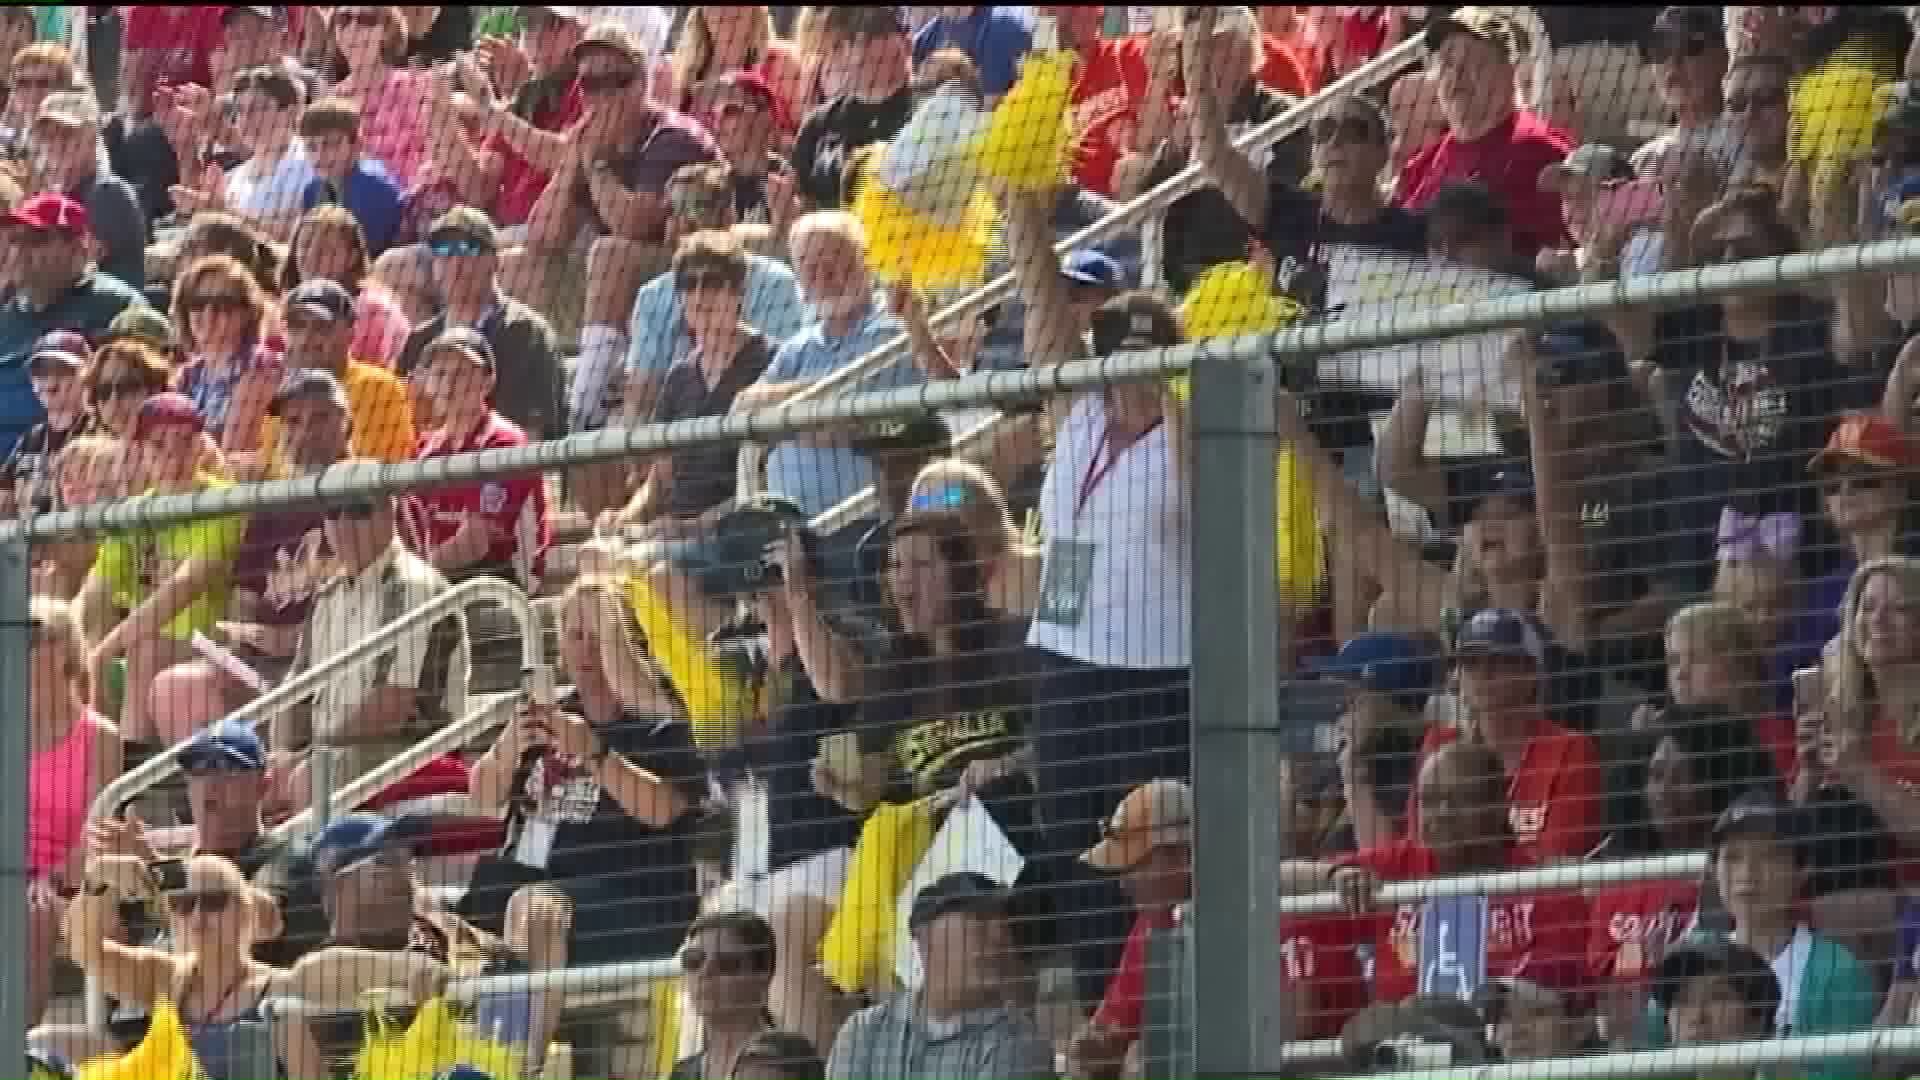 Busy Day for Fans at Little League World Series